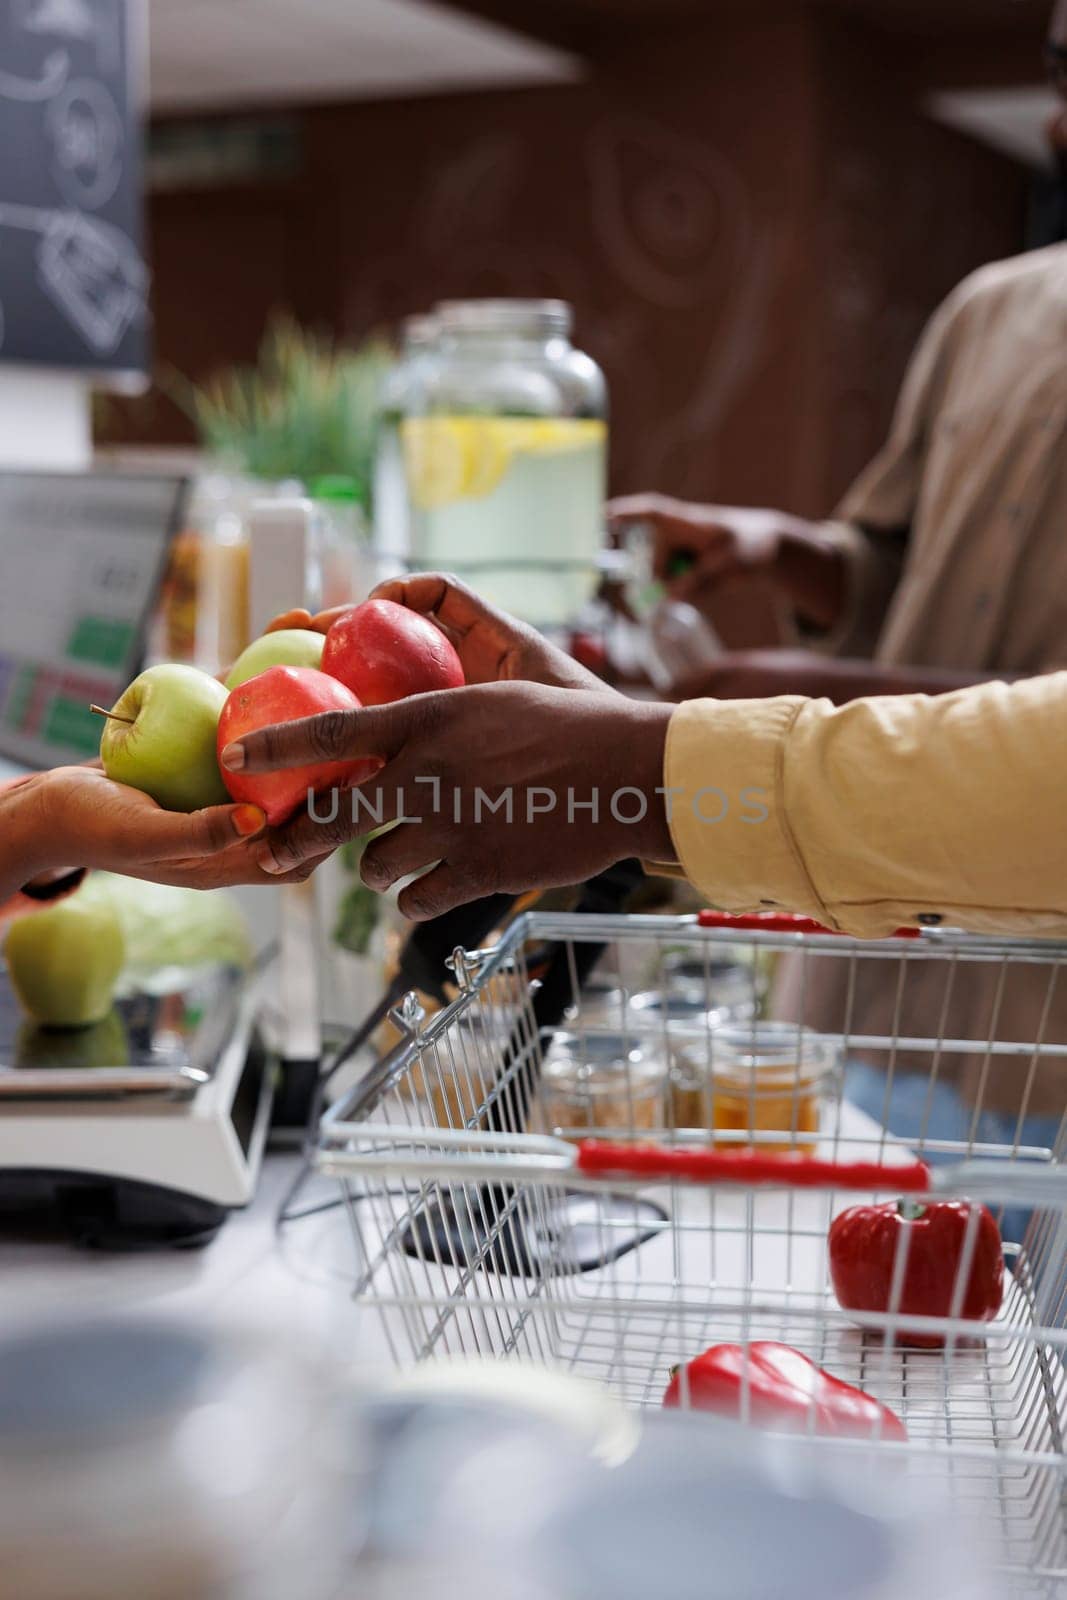 The close-up shows two African Americans' hands carrying a bunch of apples above the checkout counter. The image focused on a male customer giving fruits to the black vendor for weighing.